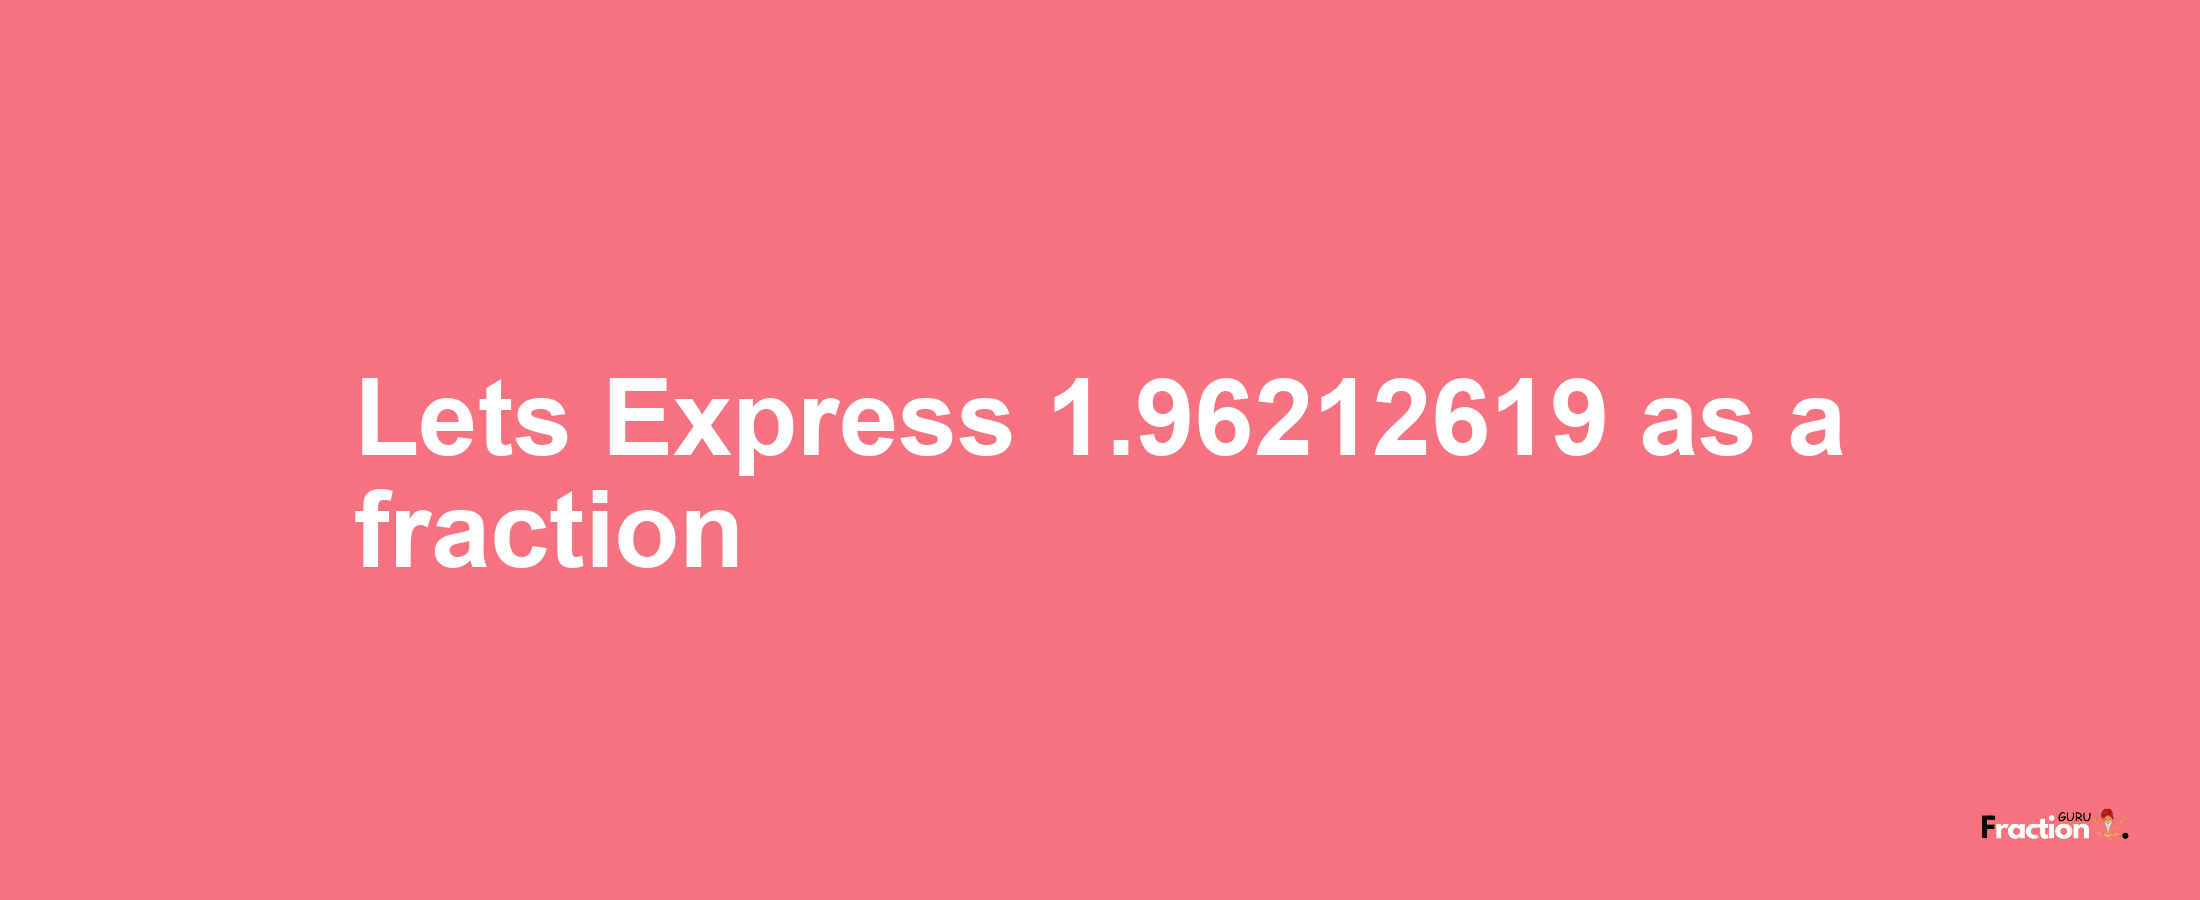 Lets Express 1.96212619 as afraction